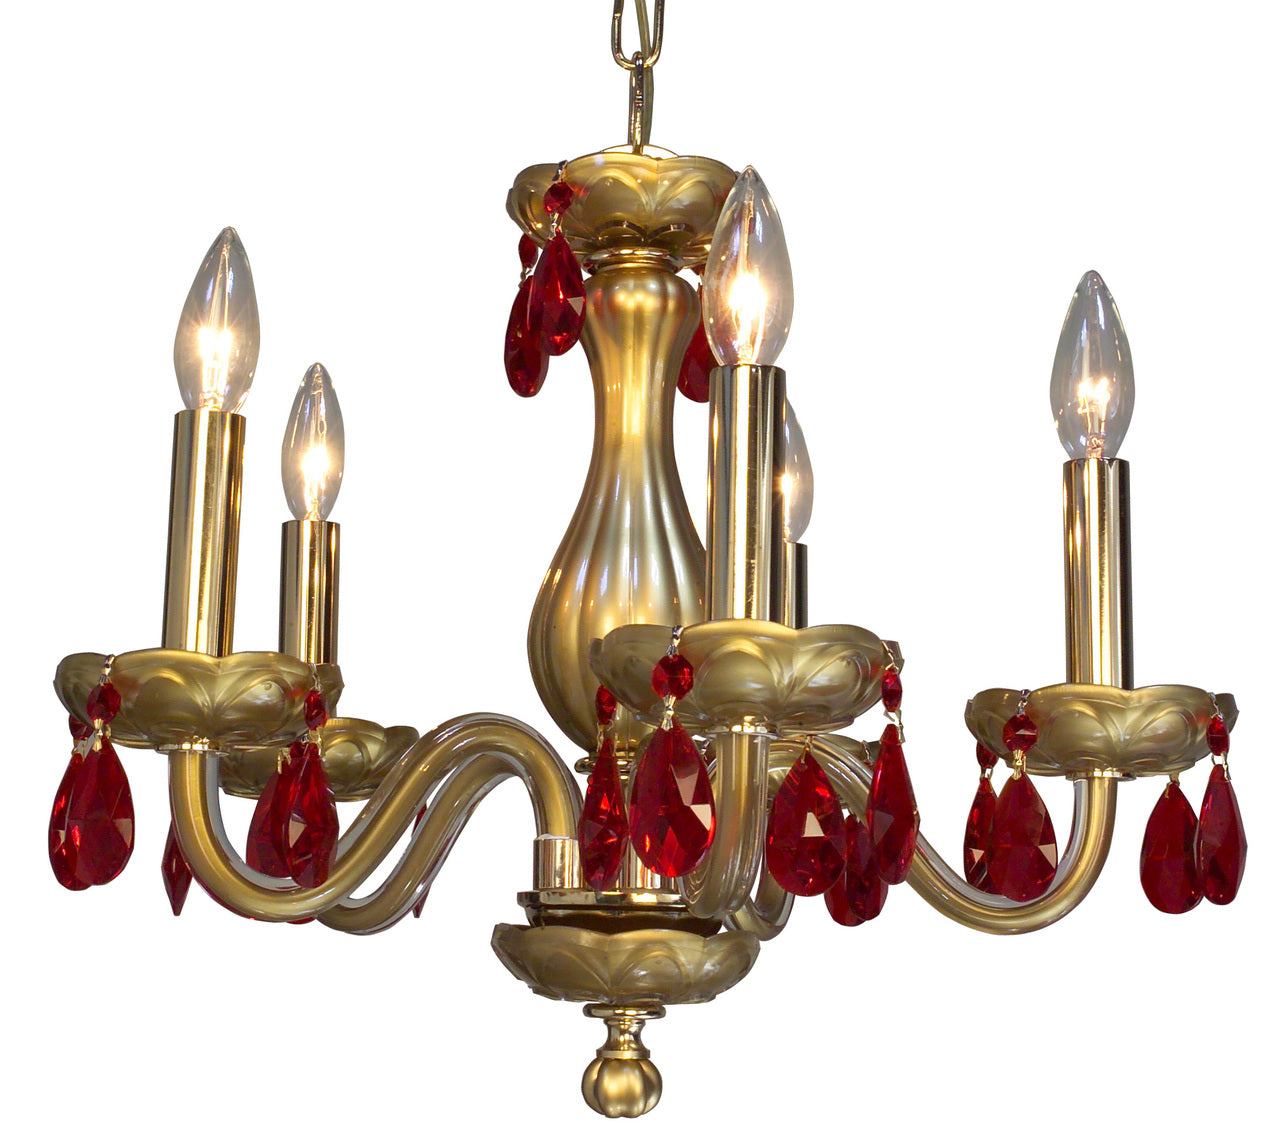 Classic Lighting 82045 GLD SFR Monaco Crystal Chandelier in Gold (Imported from Spain)